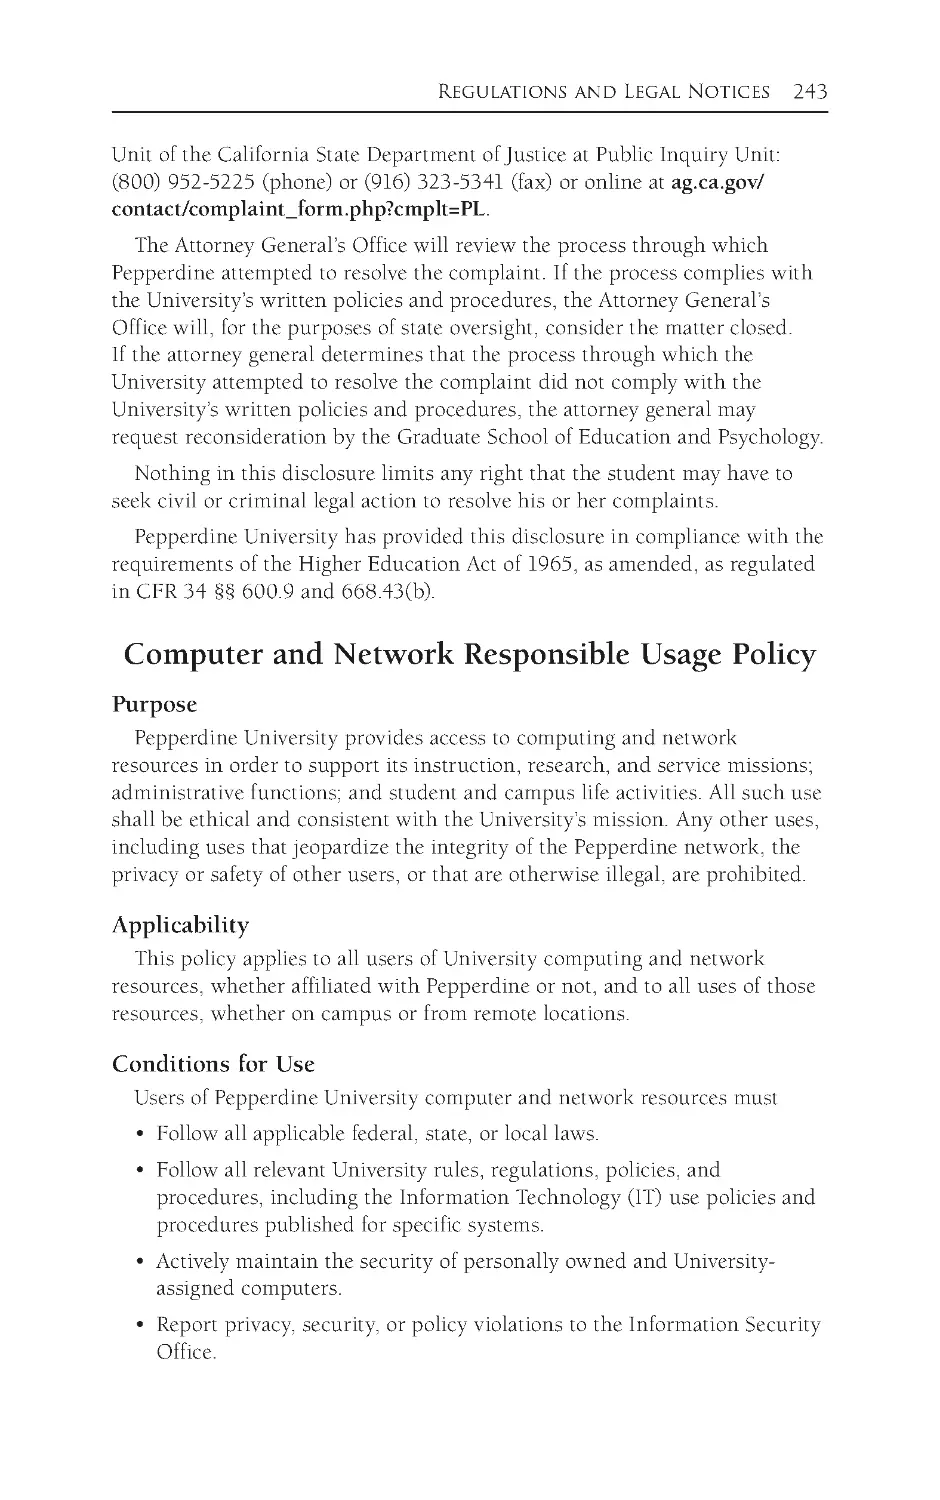 Computer and Network Responsible Usage Policy